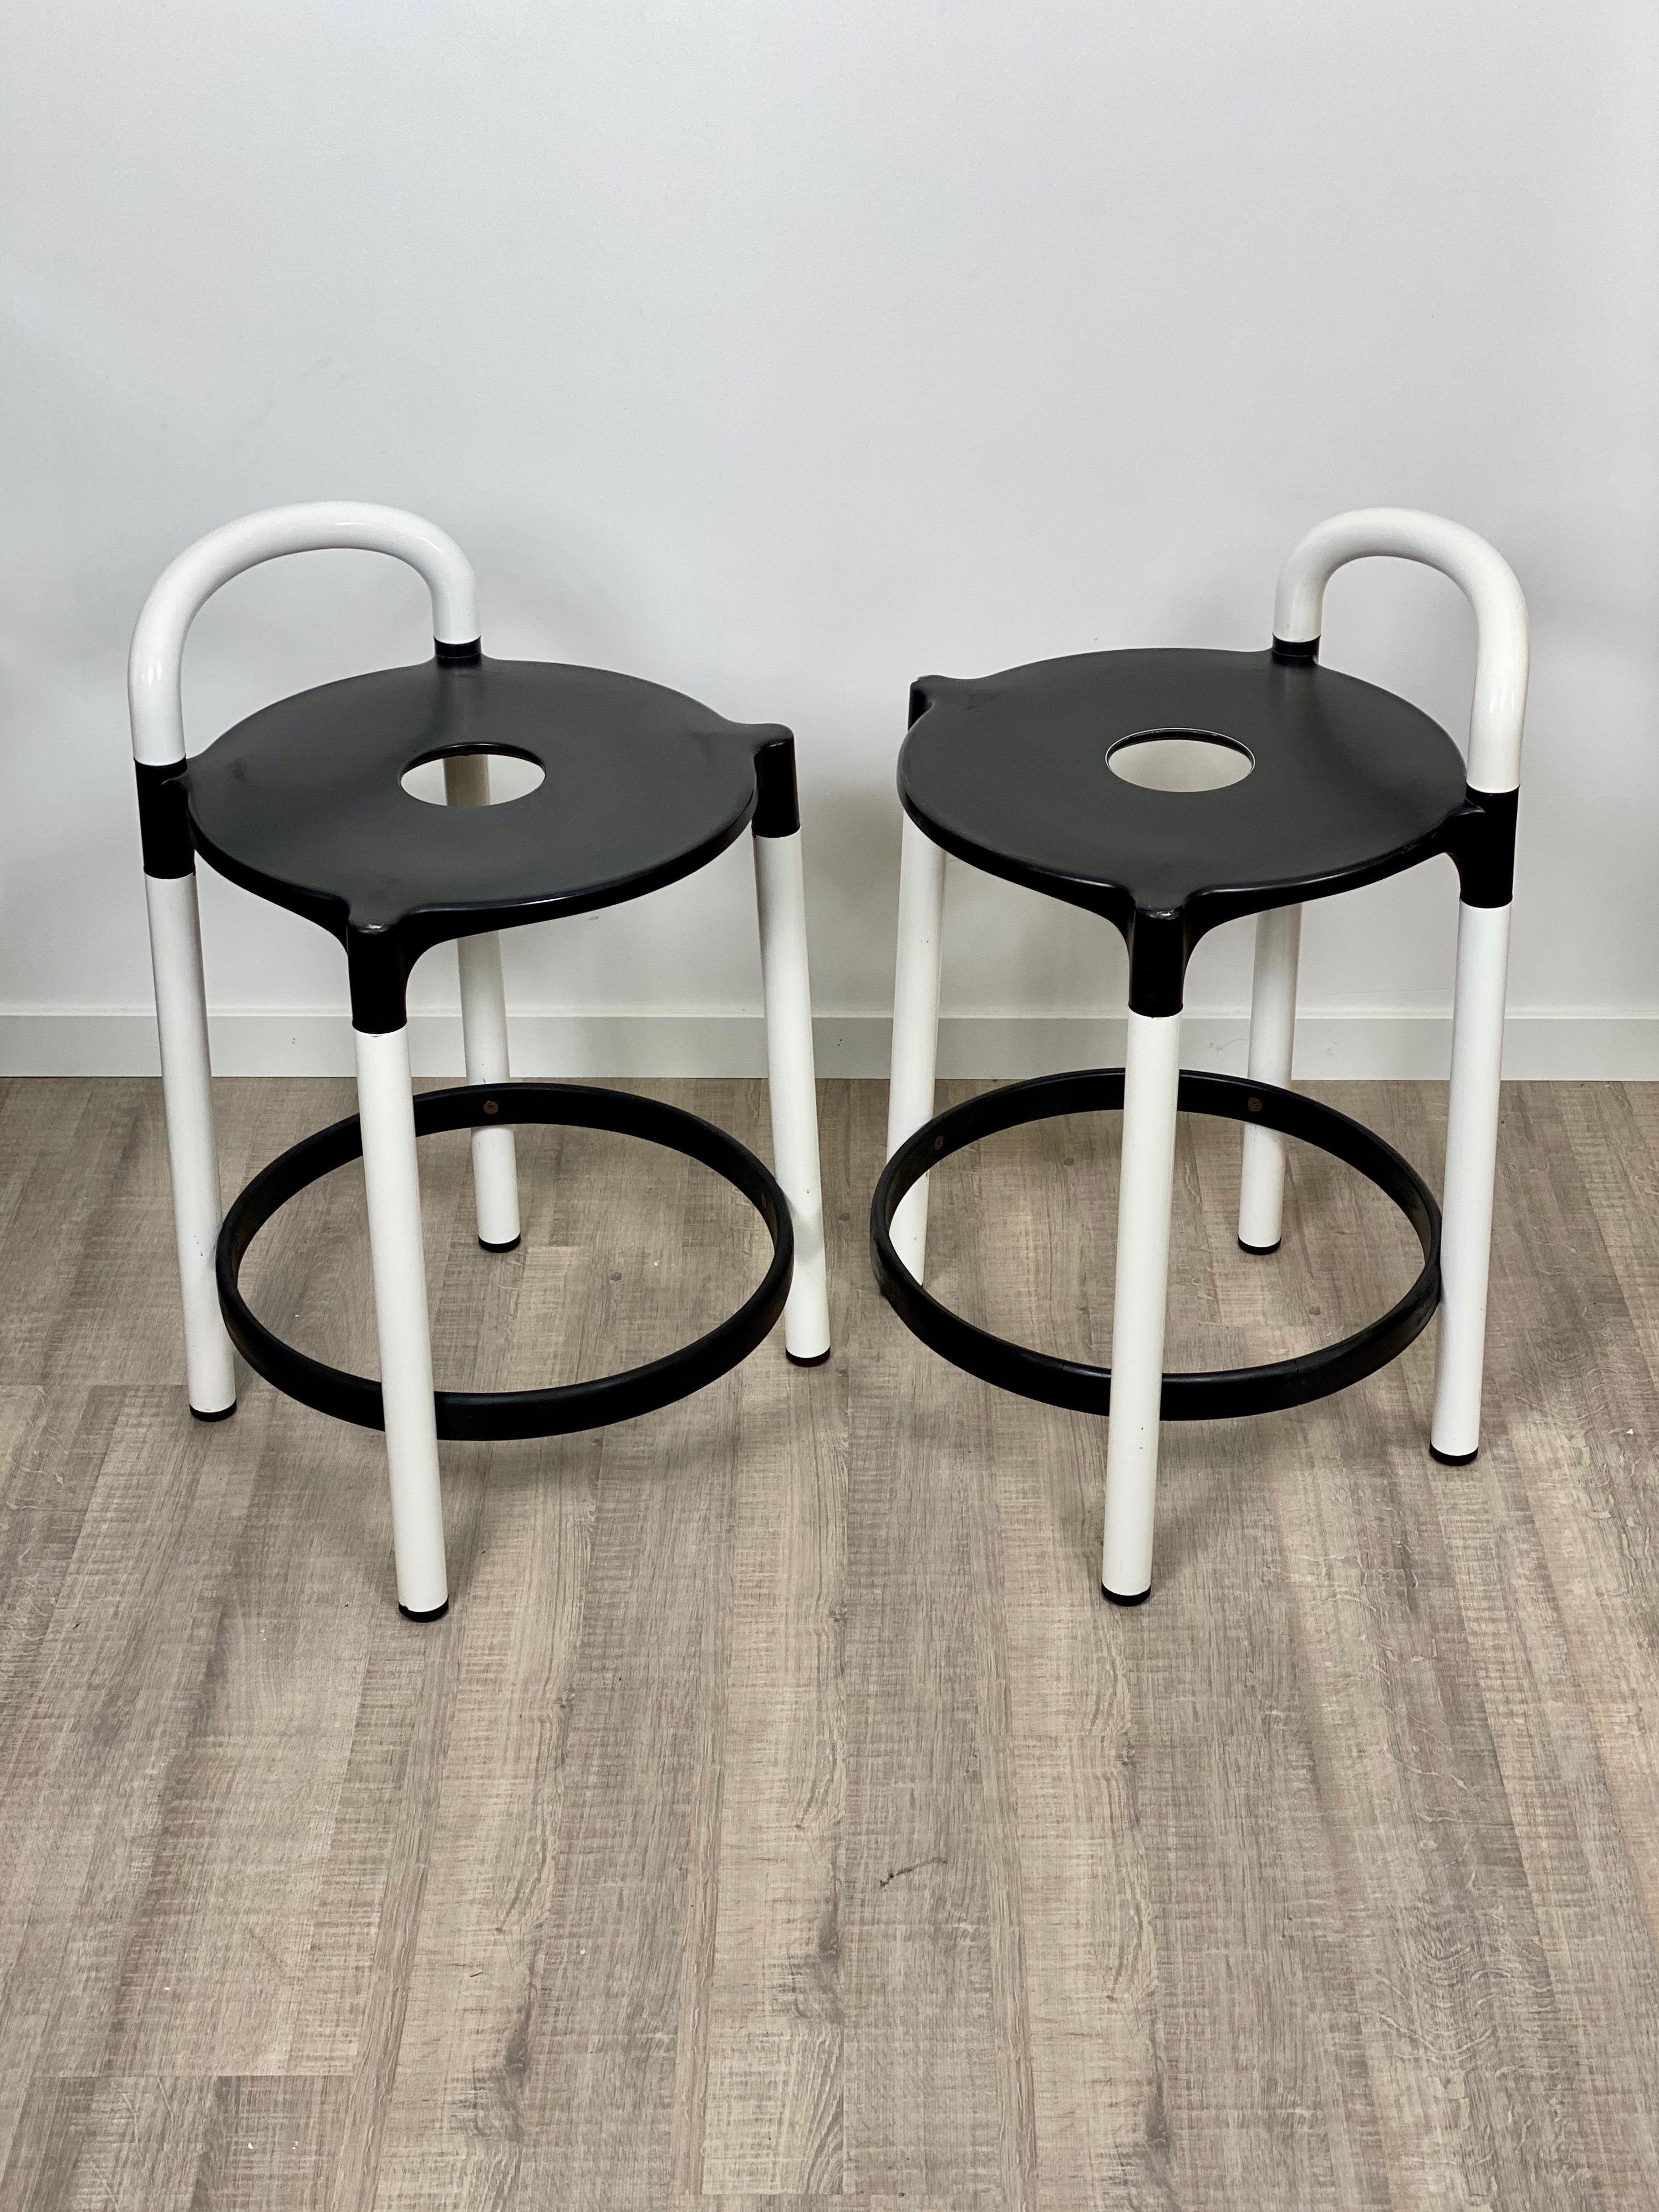 Pair of black and white Postmodern bar or counter stools by the Italian designer Anna Casatelli Ferrieri for Kartell, Italy, circa 1980.